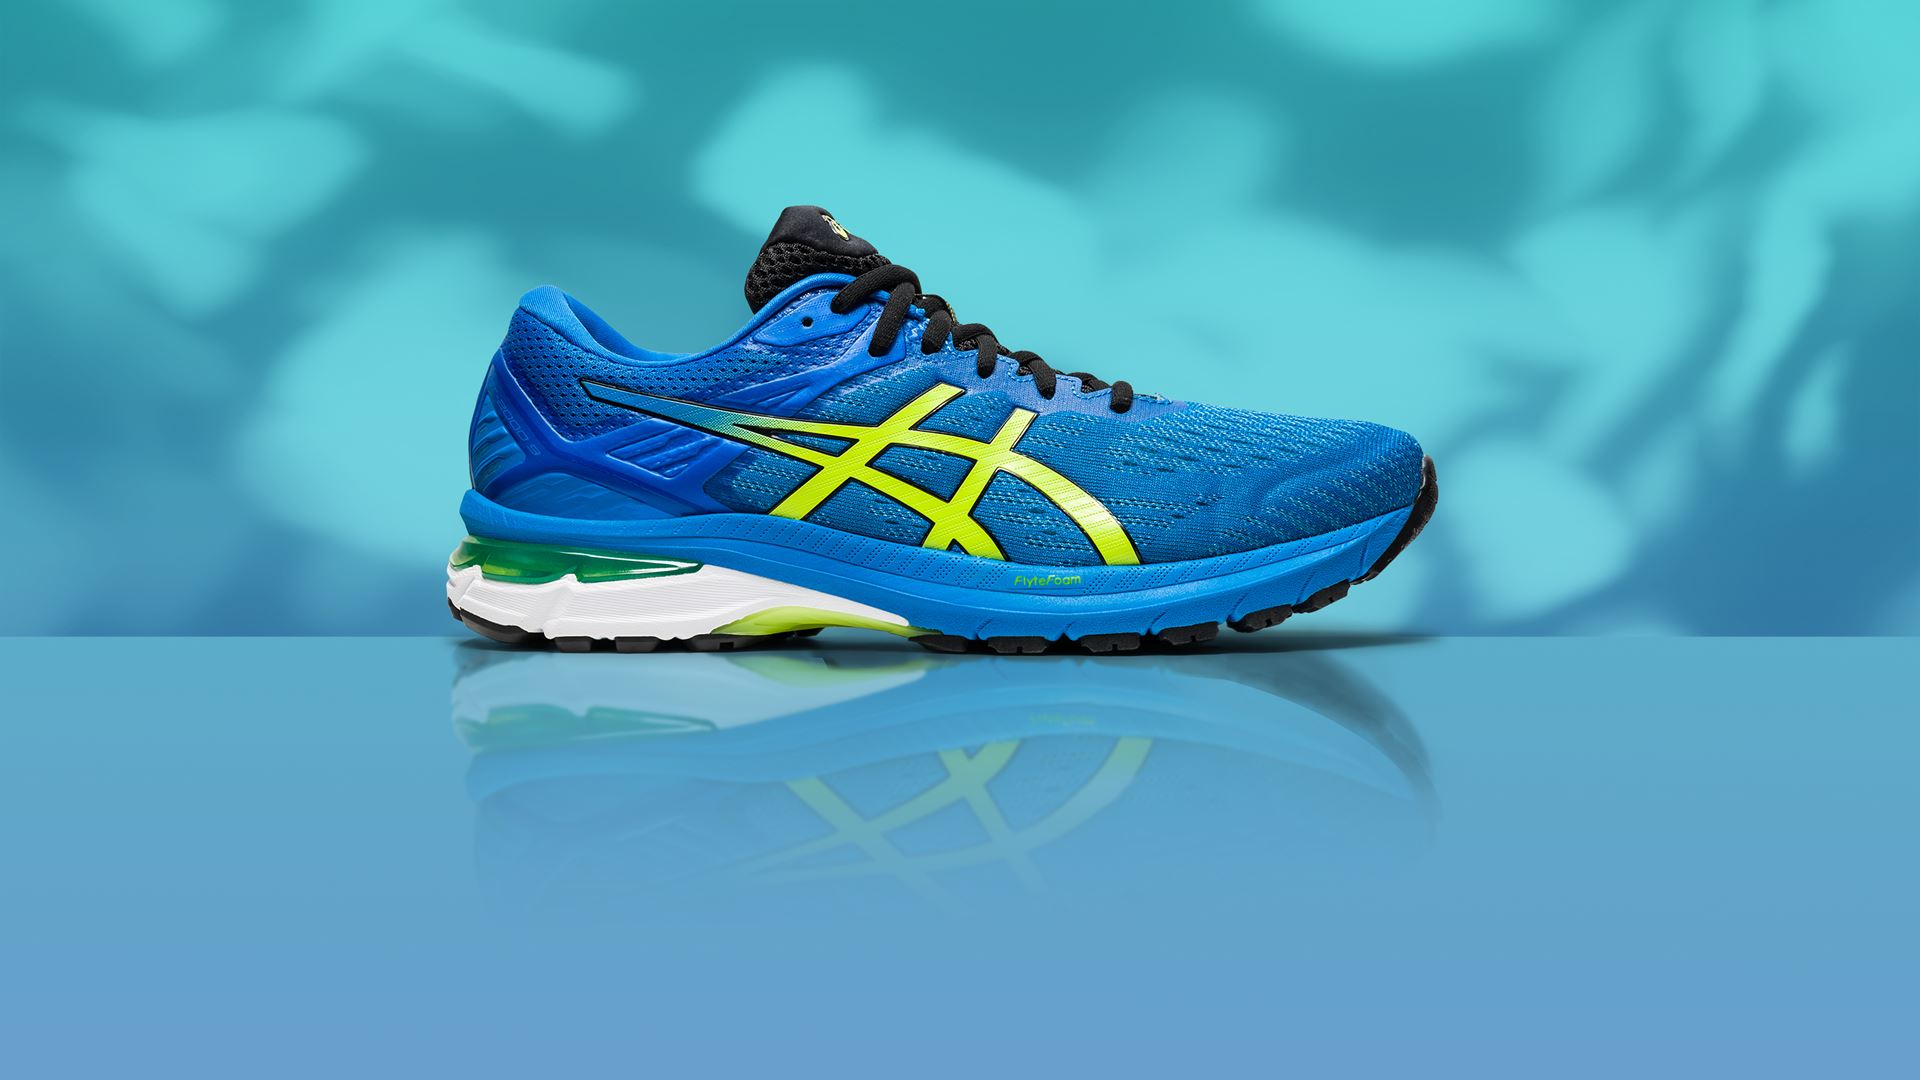 ASICS announce their latest product innovation – The GT-2000™ 9 shoe promising enhanced fit and feel for runners